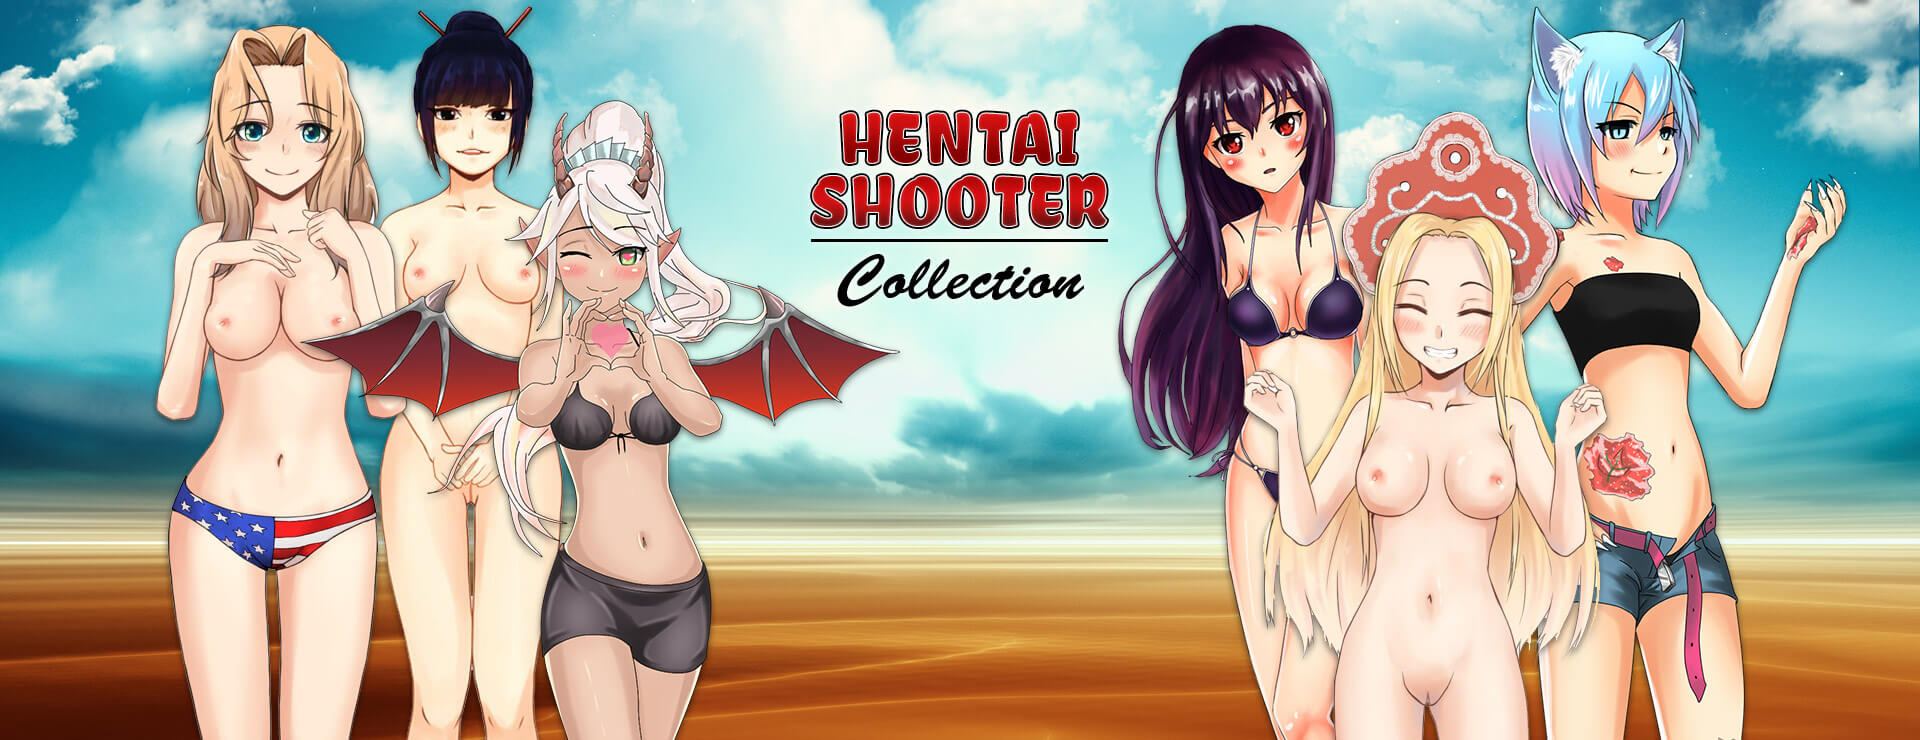 Hentai Shooter 3D - Complete Collection - Zwanglos  Spiel